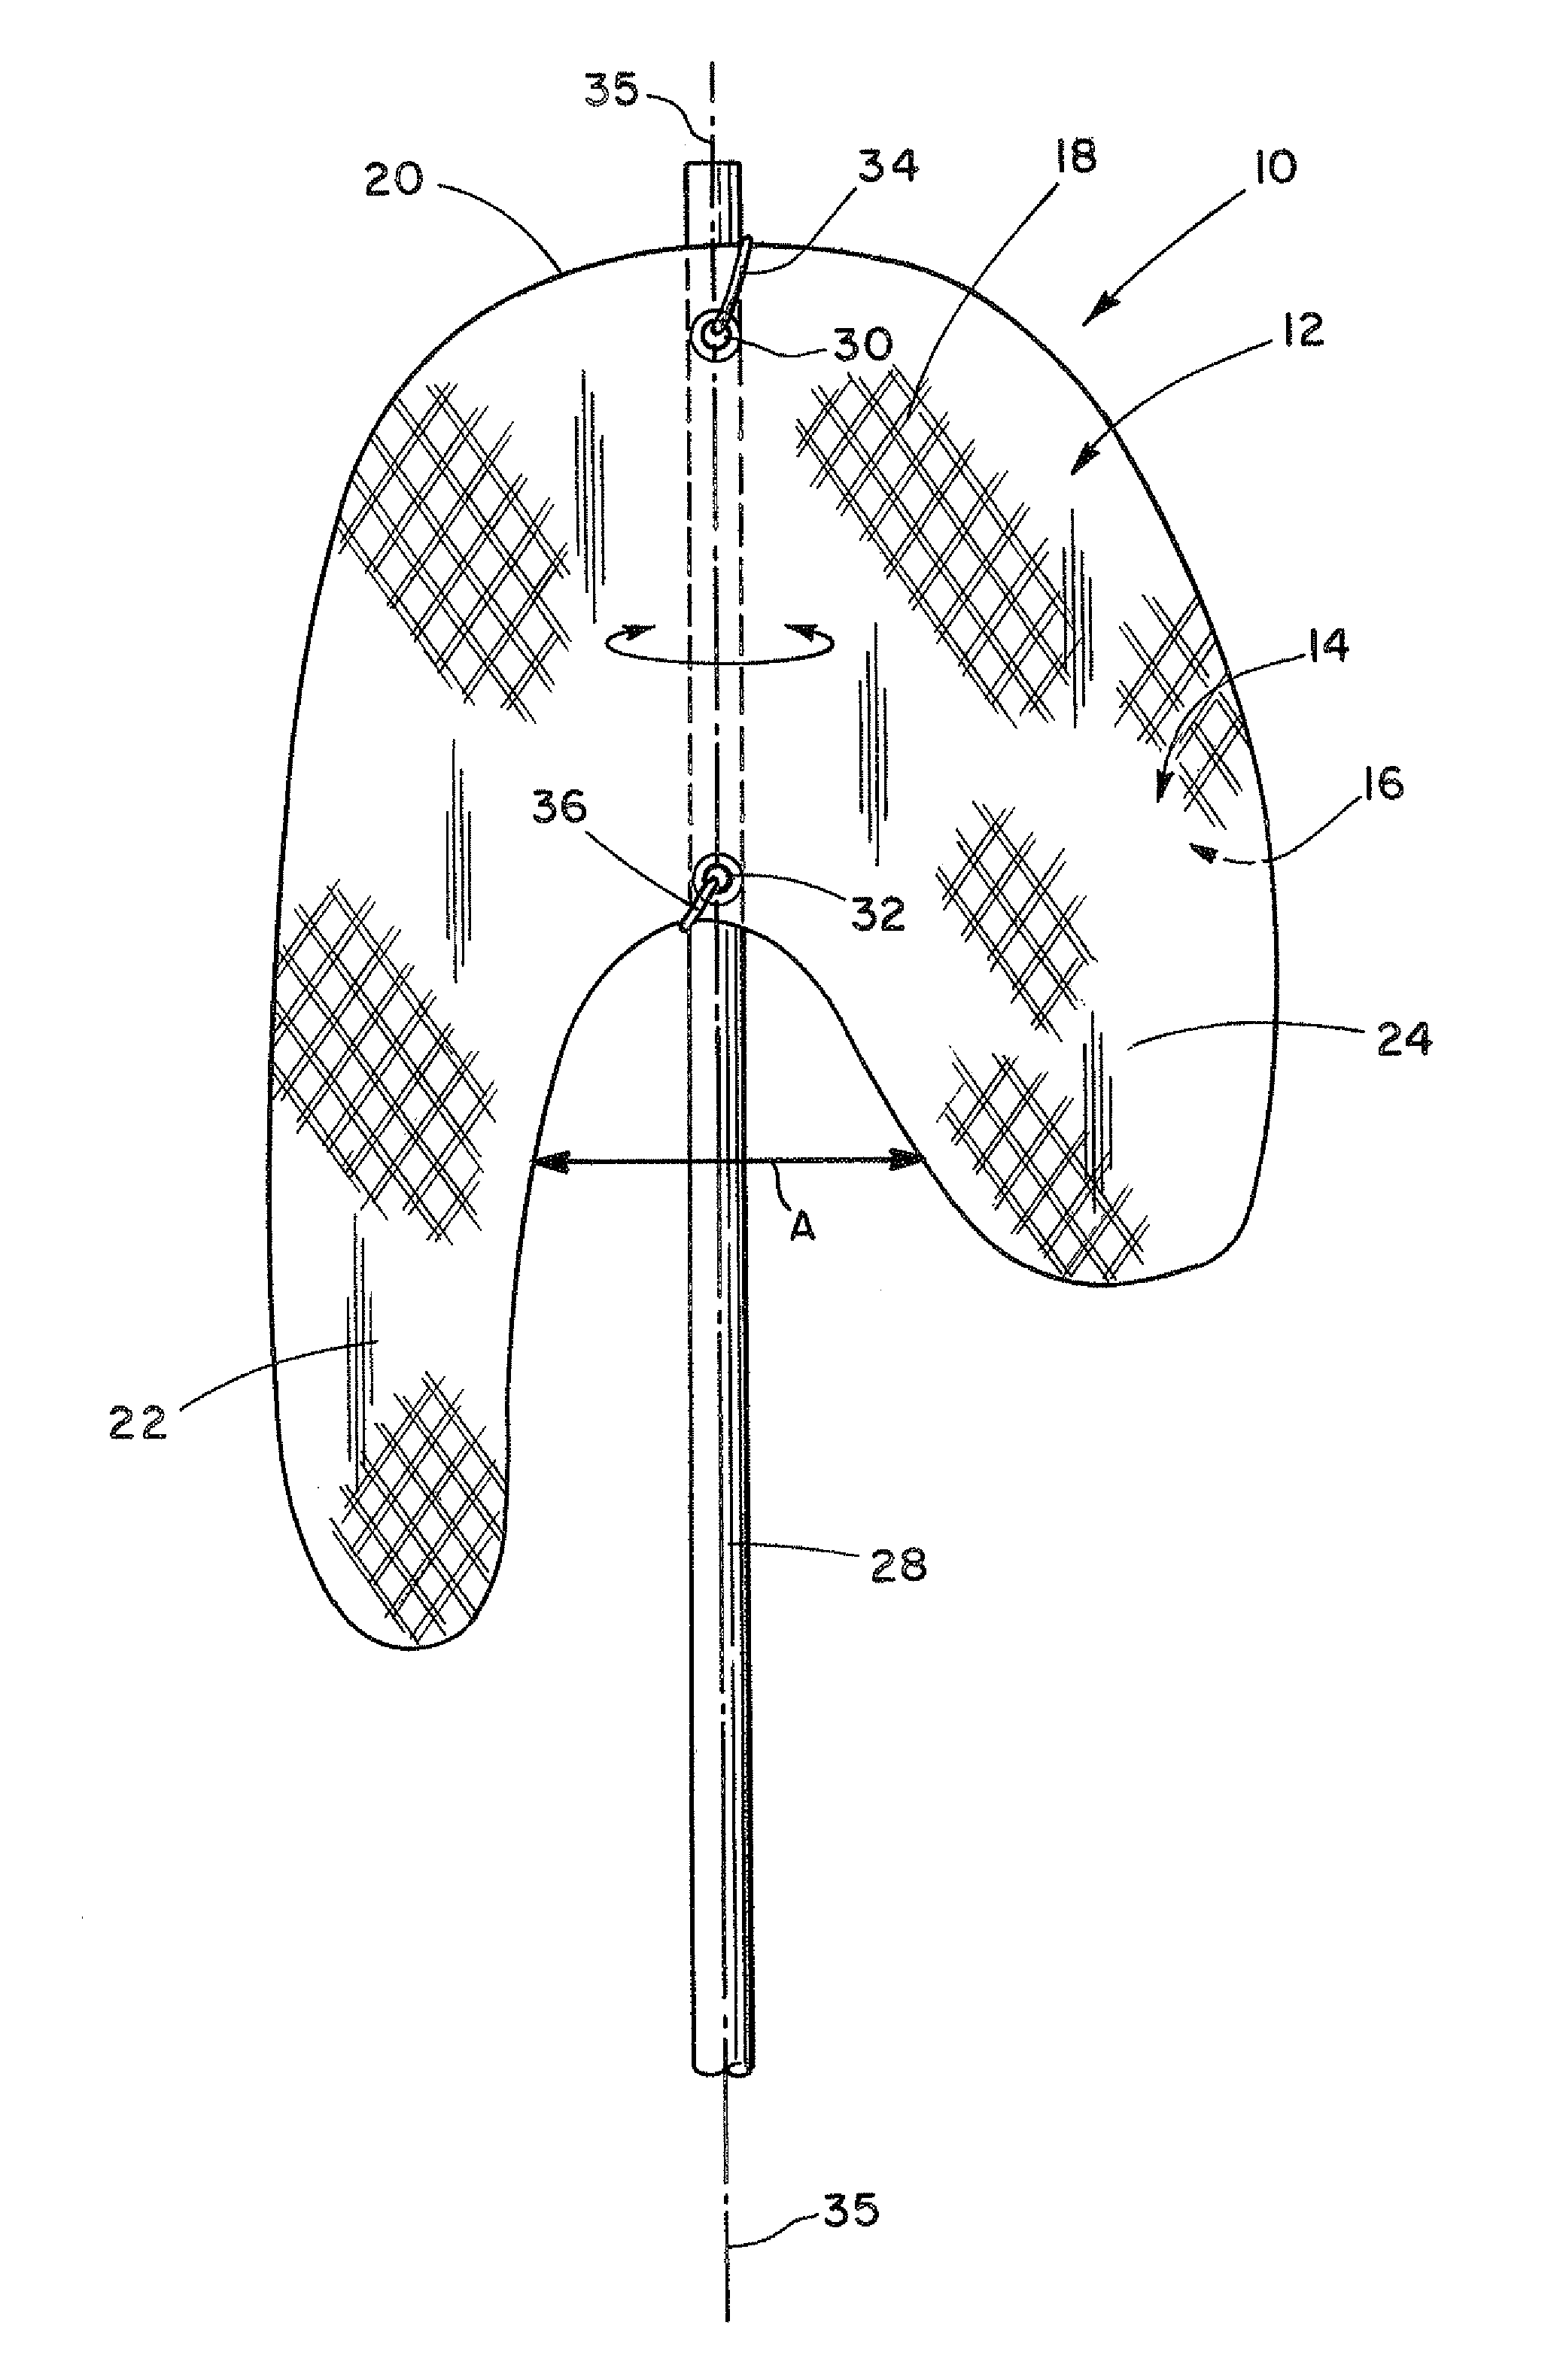 Device and system for attracting animals